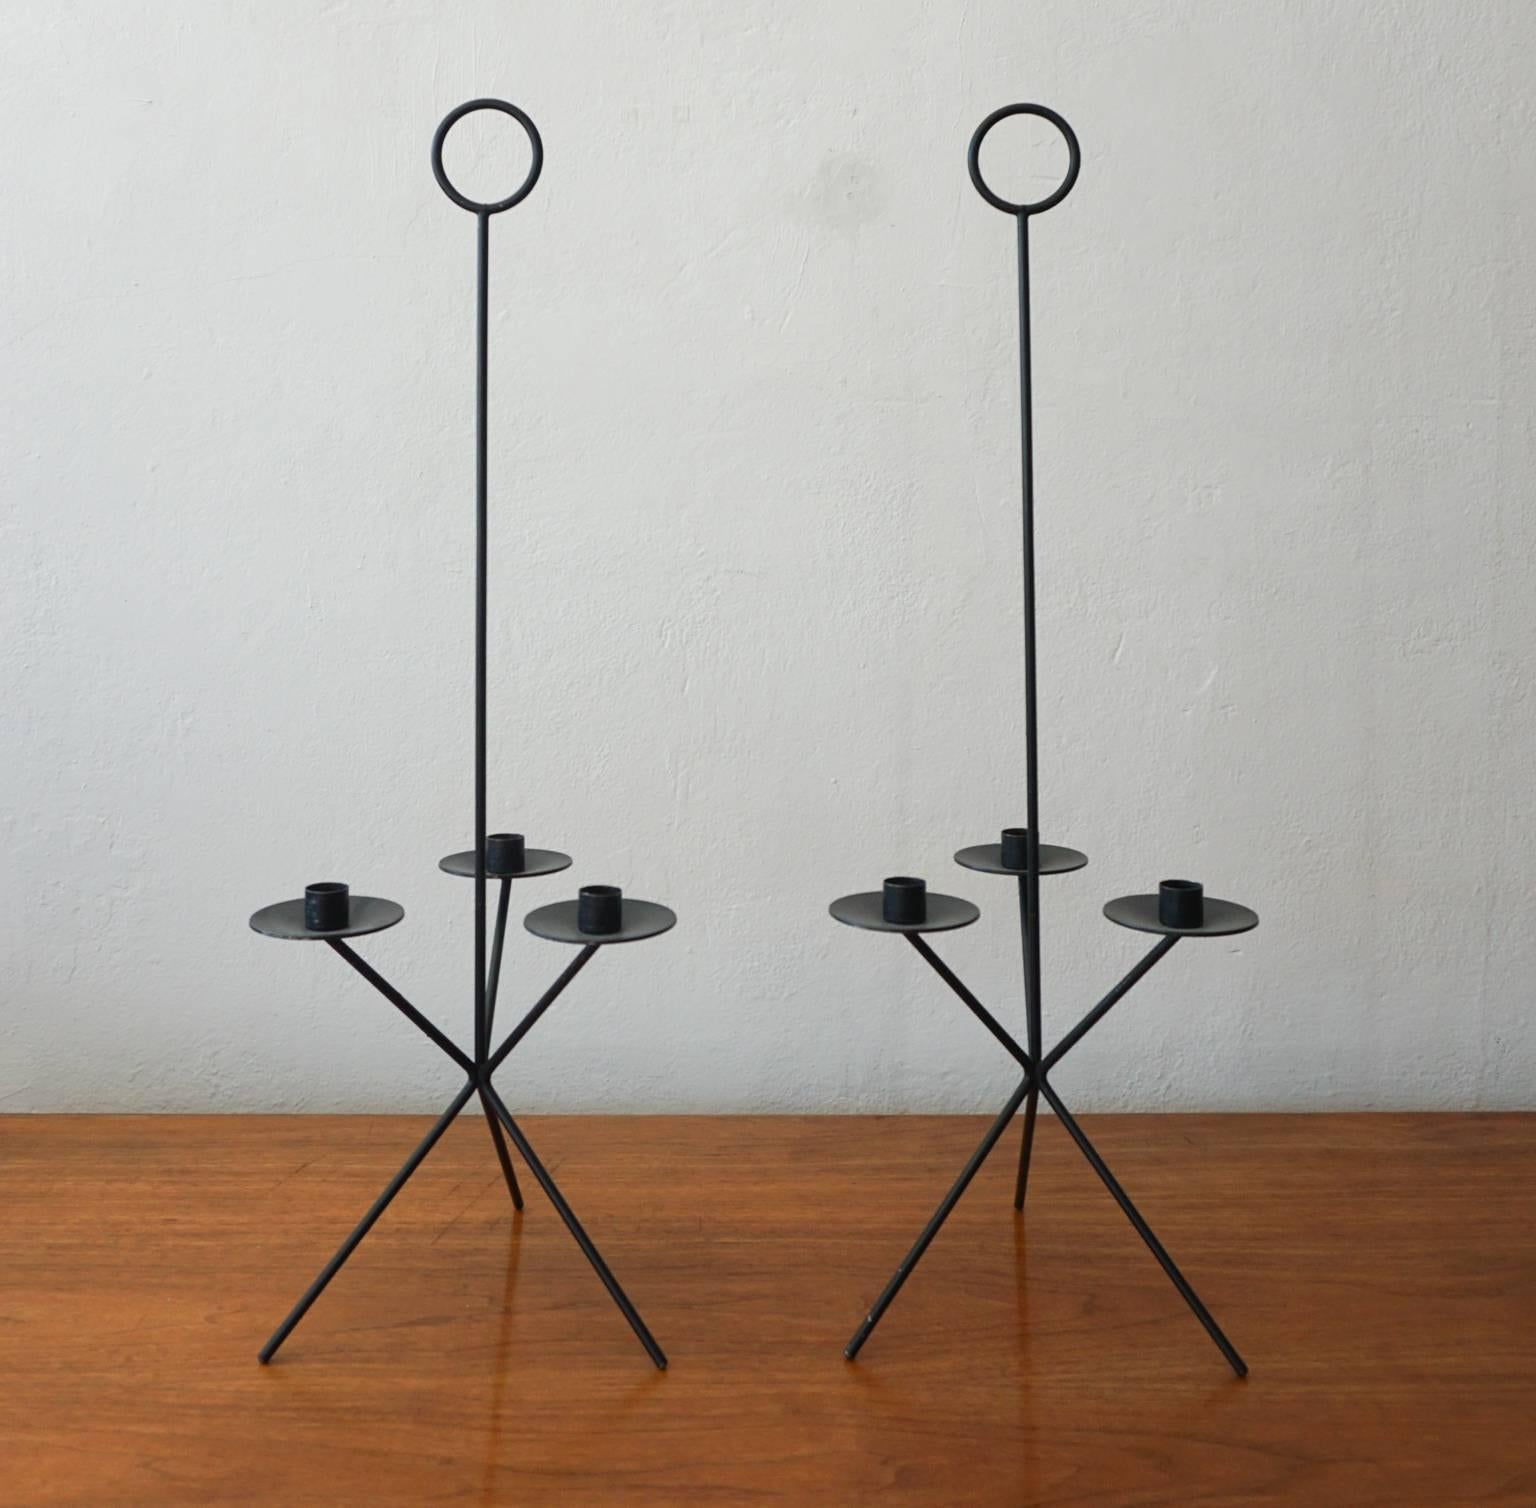 Pair of 1950s iron candleholders. Well-made and original finish.